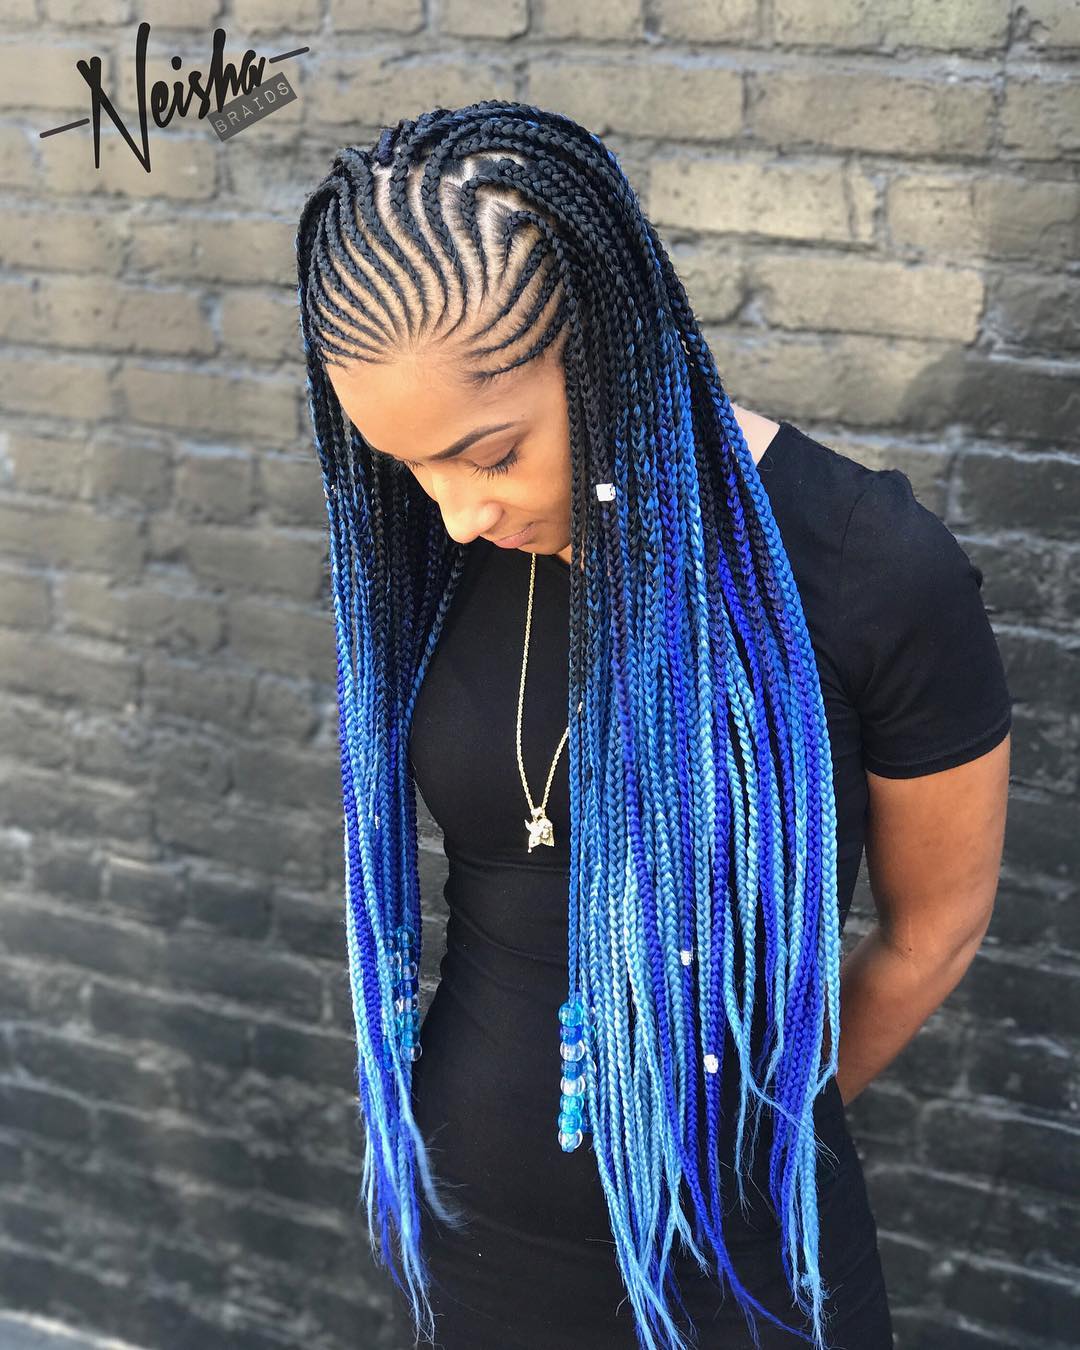 38. Extra Long Blue Braids with Braids 